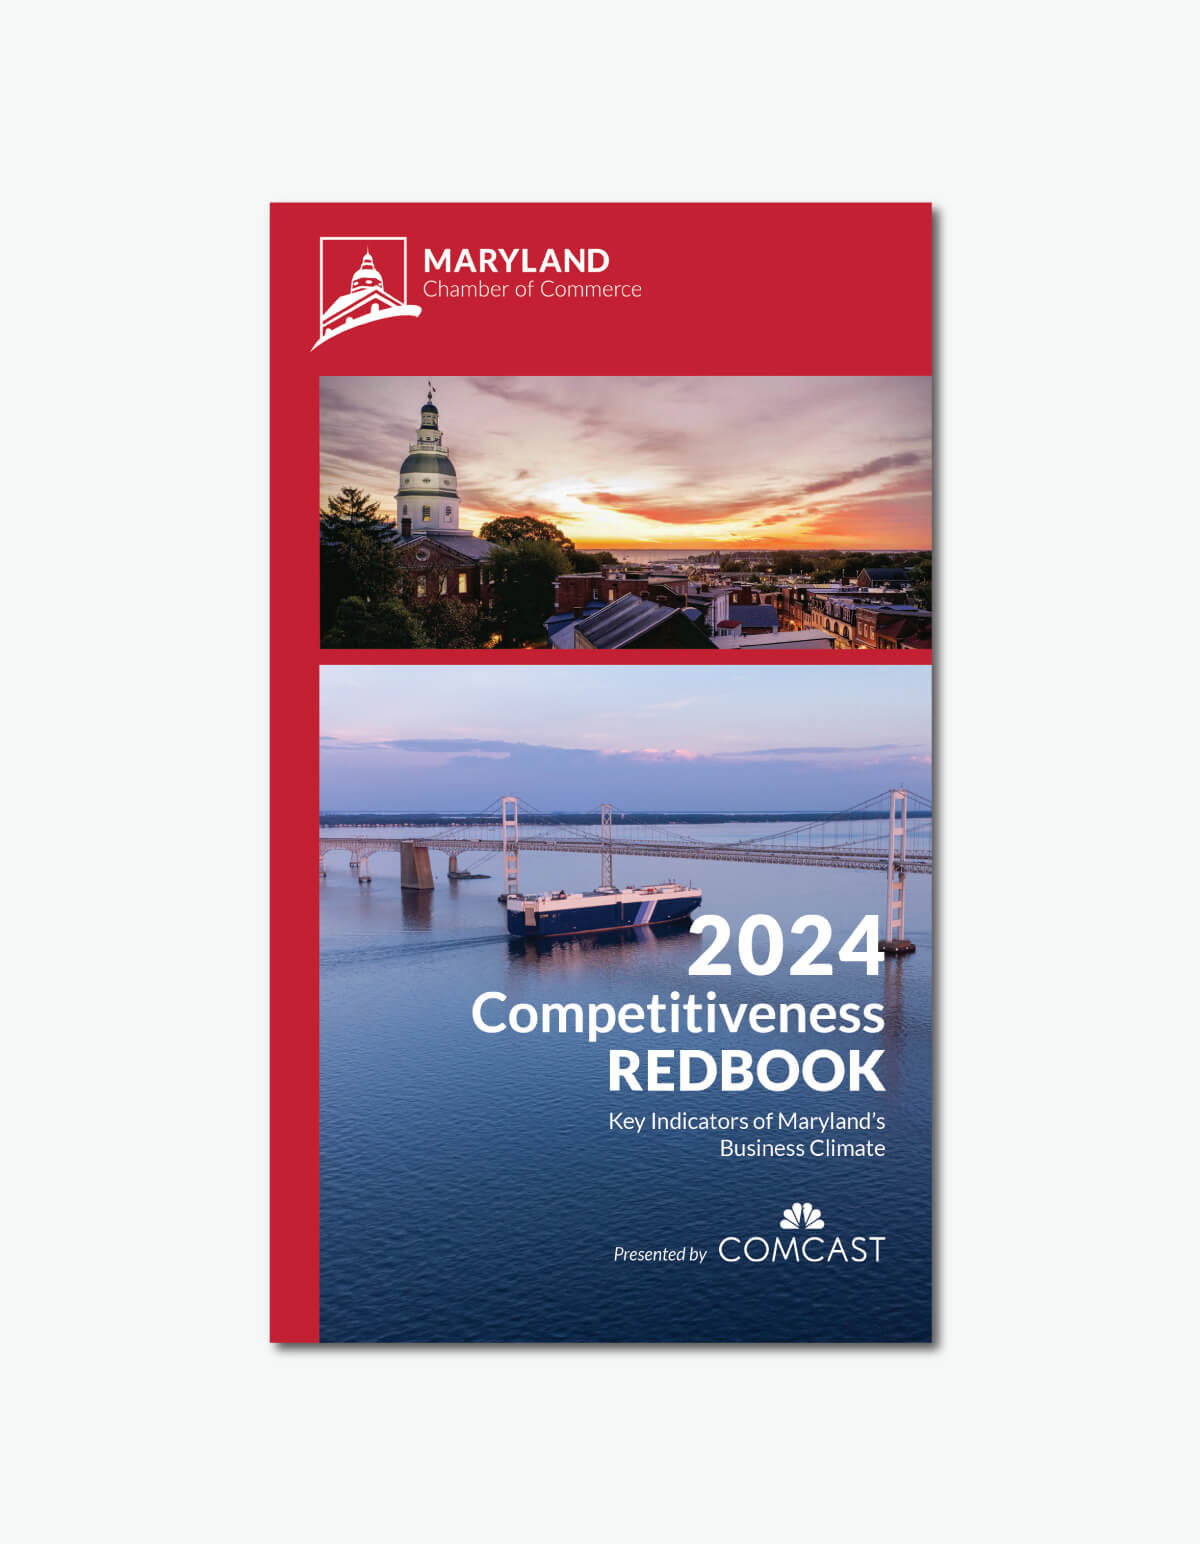 Front cover of the Maryland Chamber of Commerce’s 2024 Competitiveness Redbook, which includes numerous charts providing information about where Maryland ranks in terms of key economic indicators versus other states.